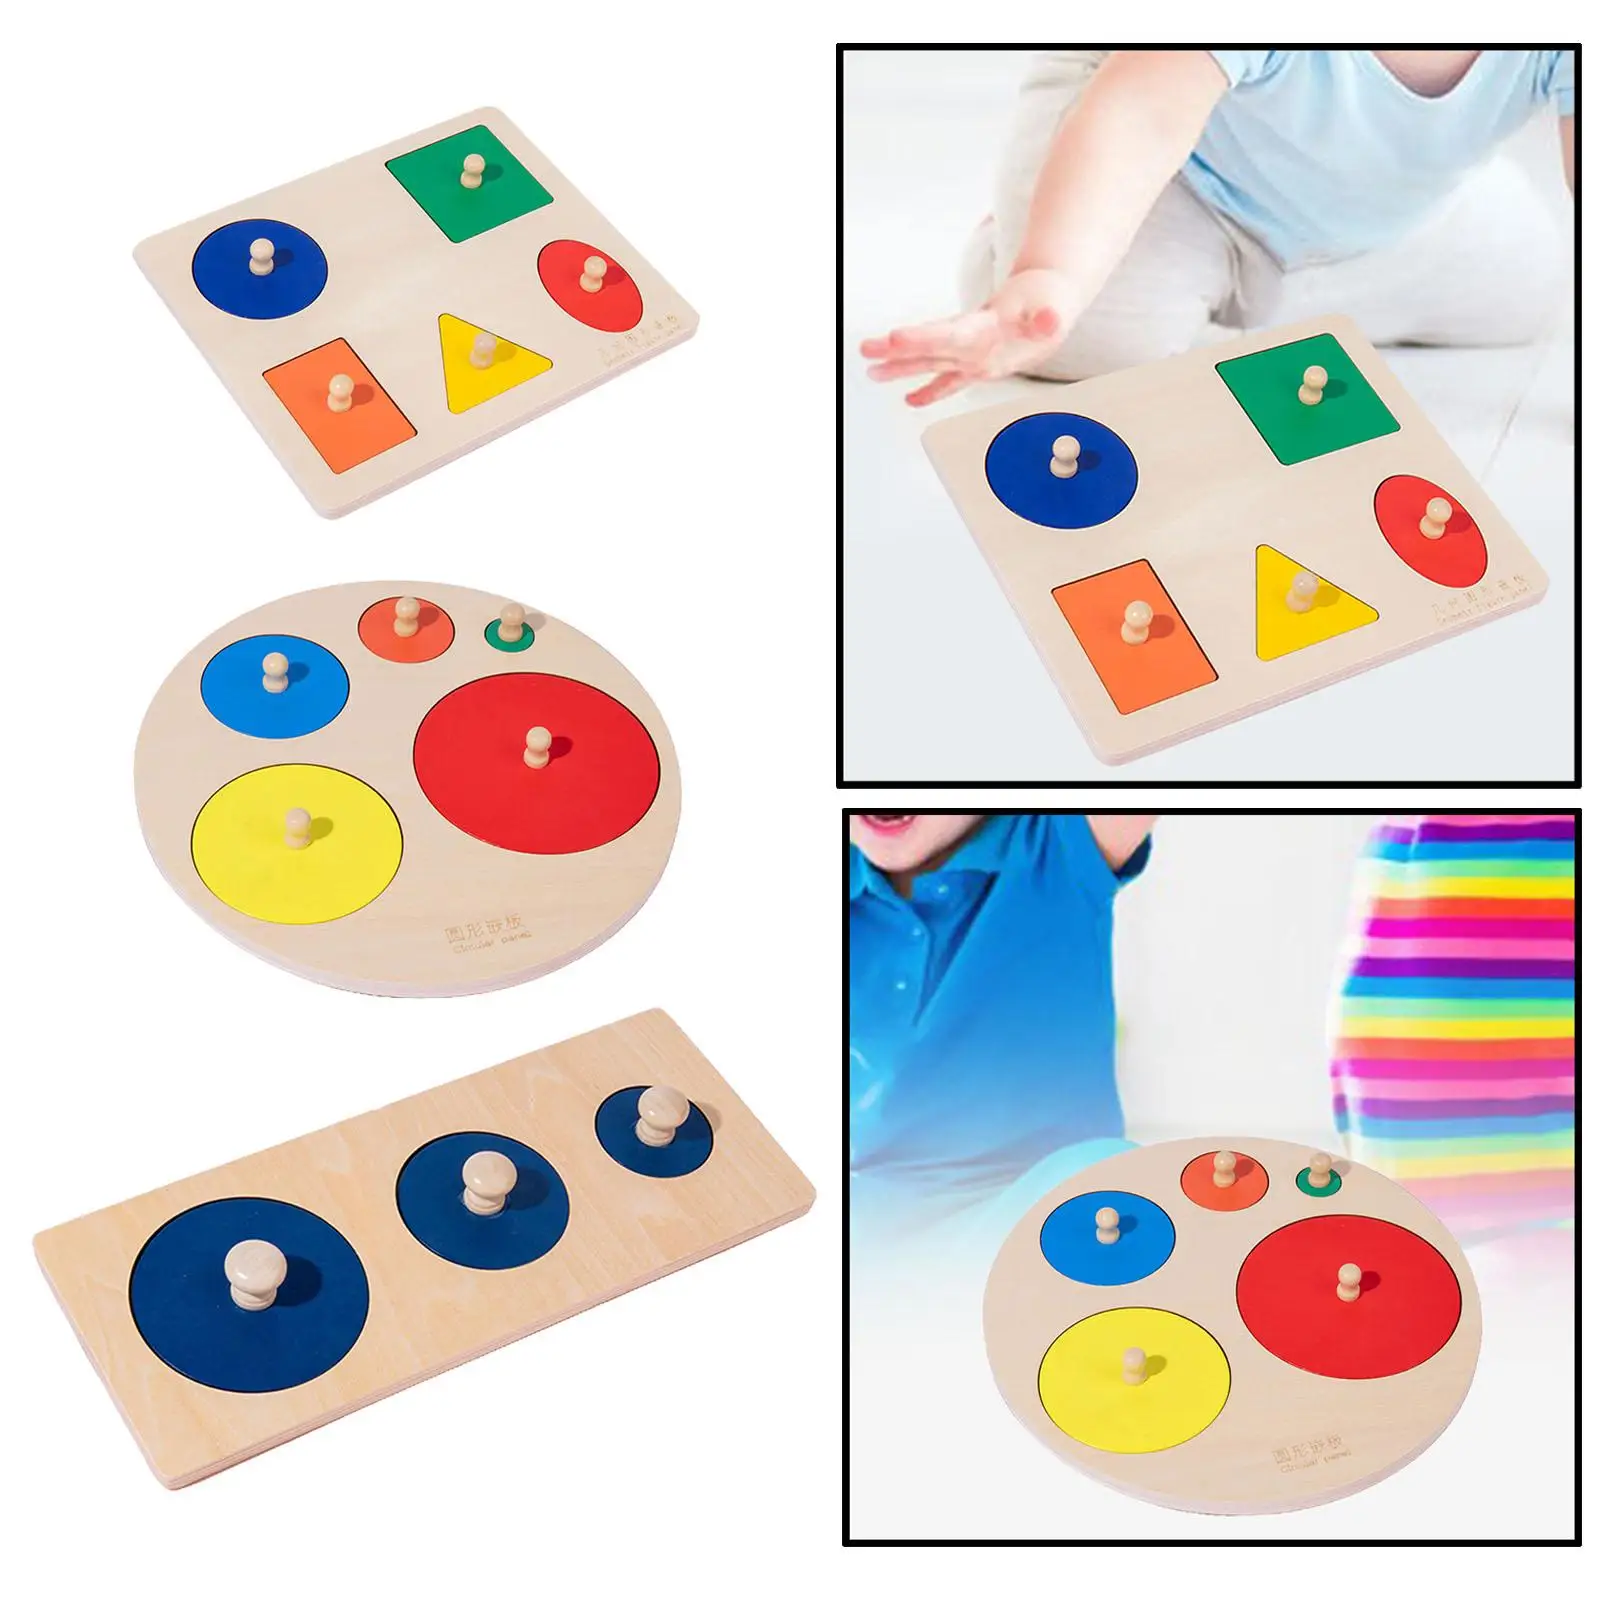 Wood Shape Puzzles Learning Activities Preschool Learning Educational Material Sensorial Toy for Playroom